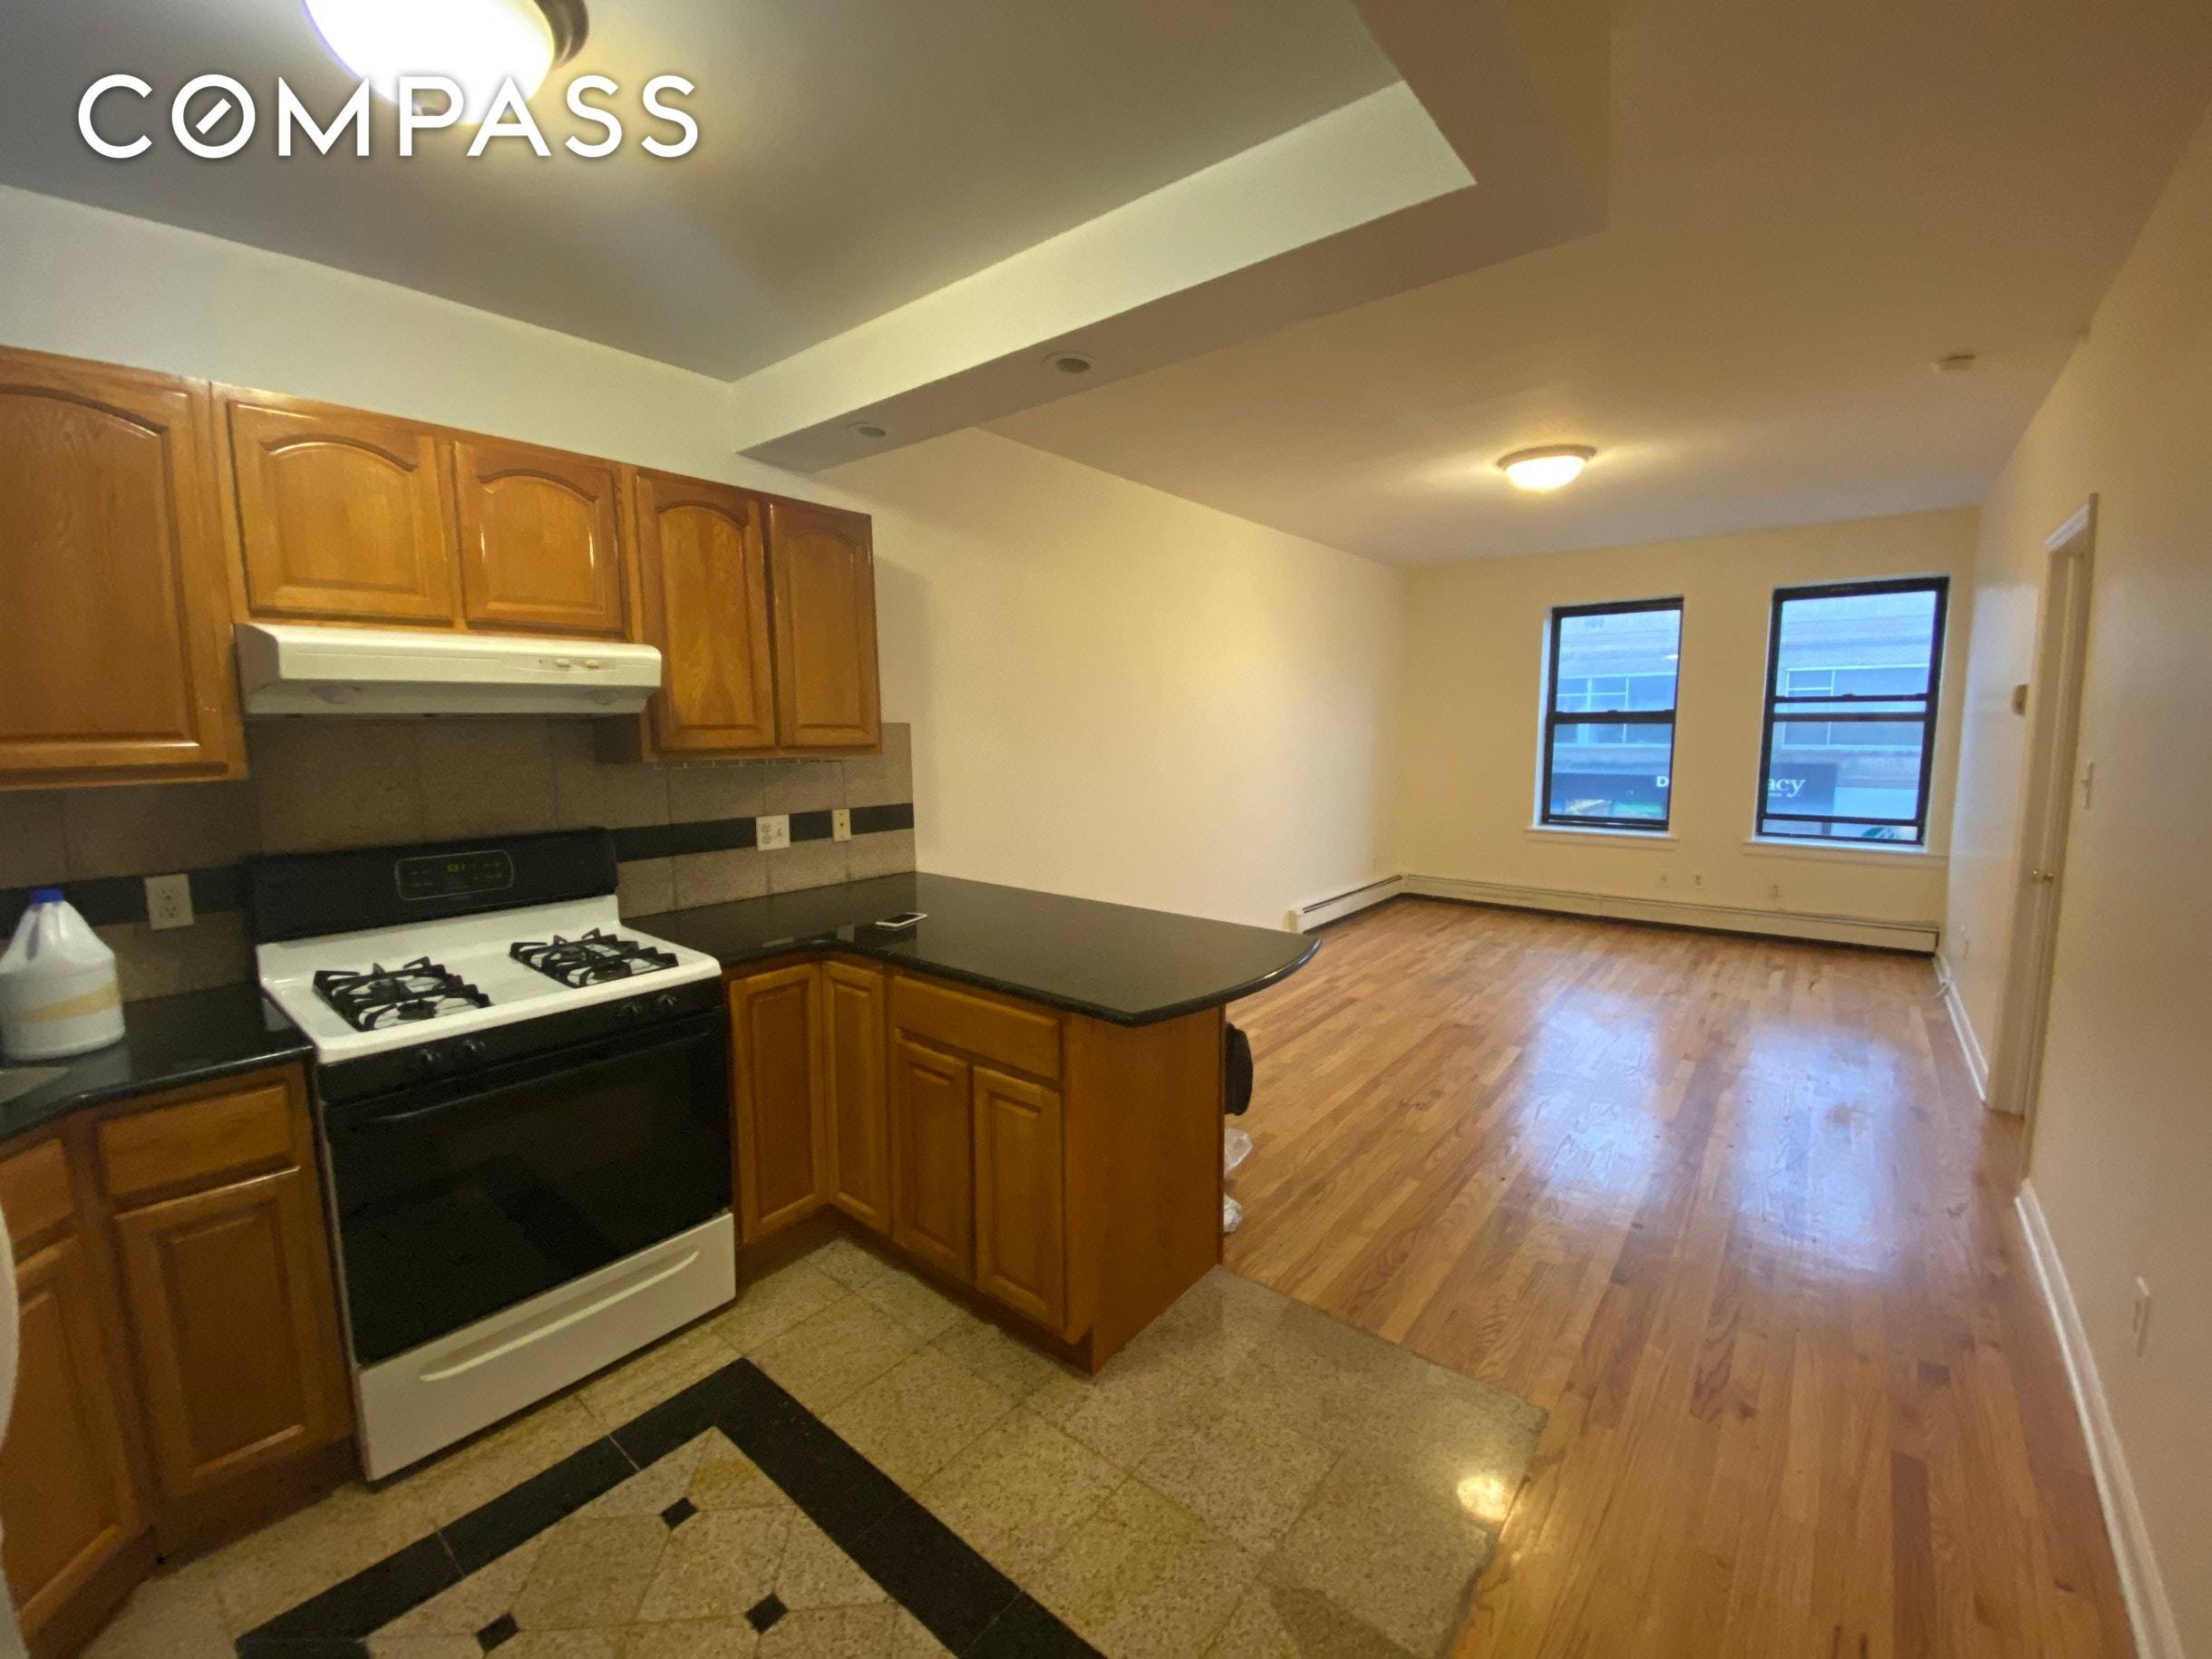 Large 3bedroom 1. 5 bath in the heart of Astoria, Broadway amp ; 35th St.